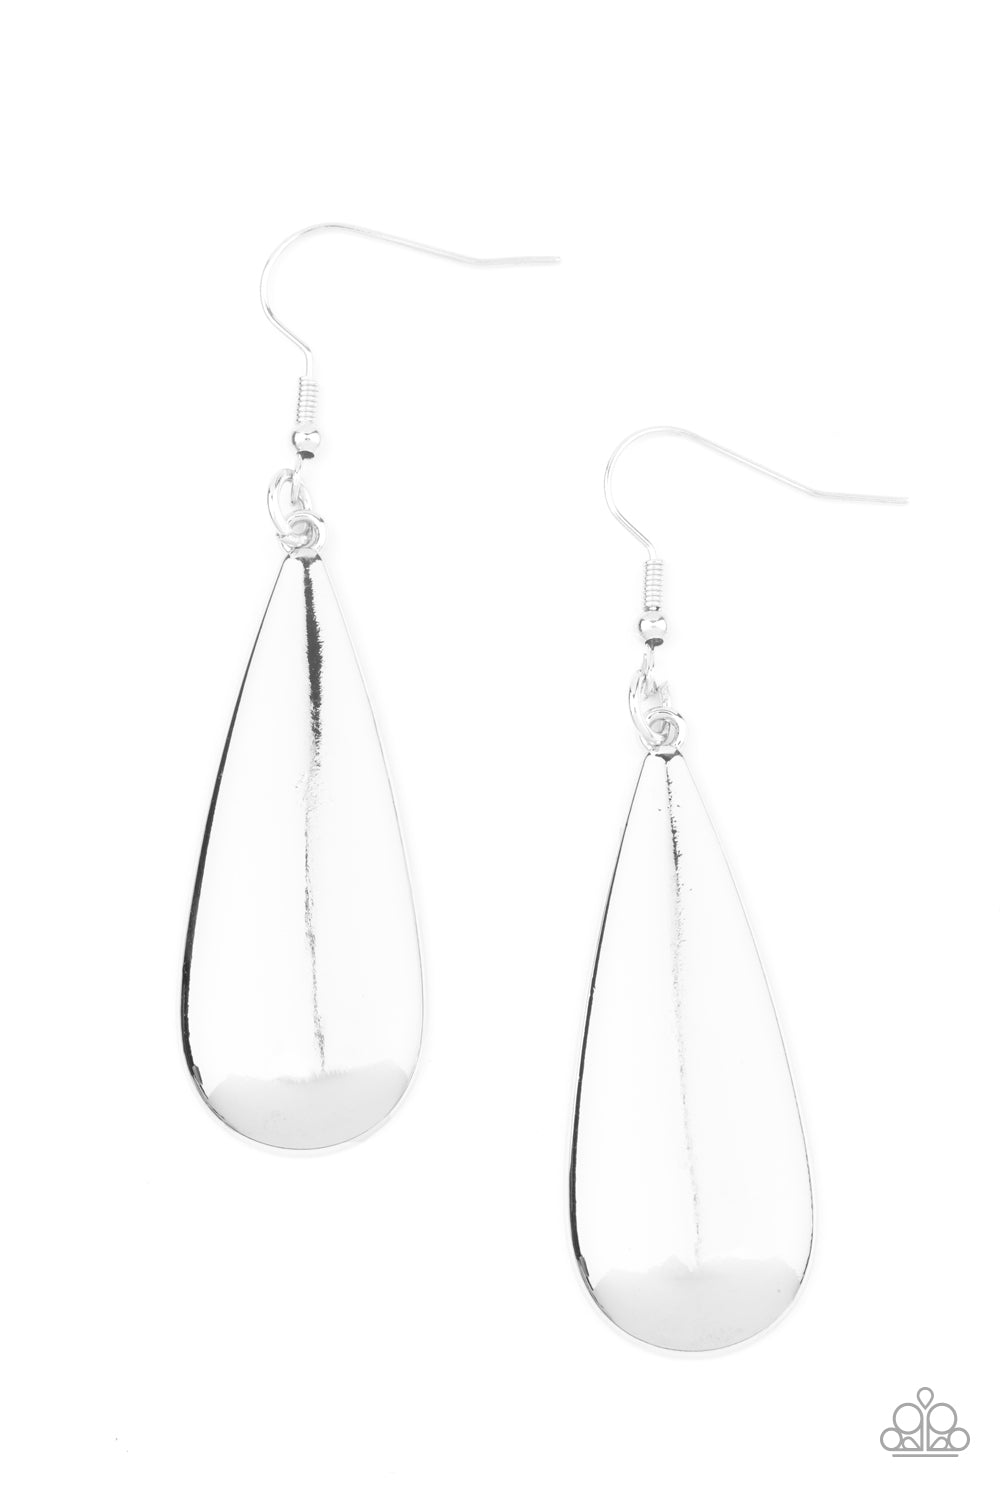 Brushed in a high-sheen shimmer, an oversized silver teardrop swings from the ear for a dramatically classic look. Earring attaches to a standard fishhook fitting.